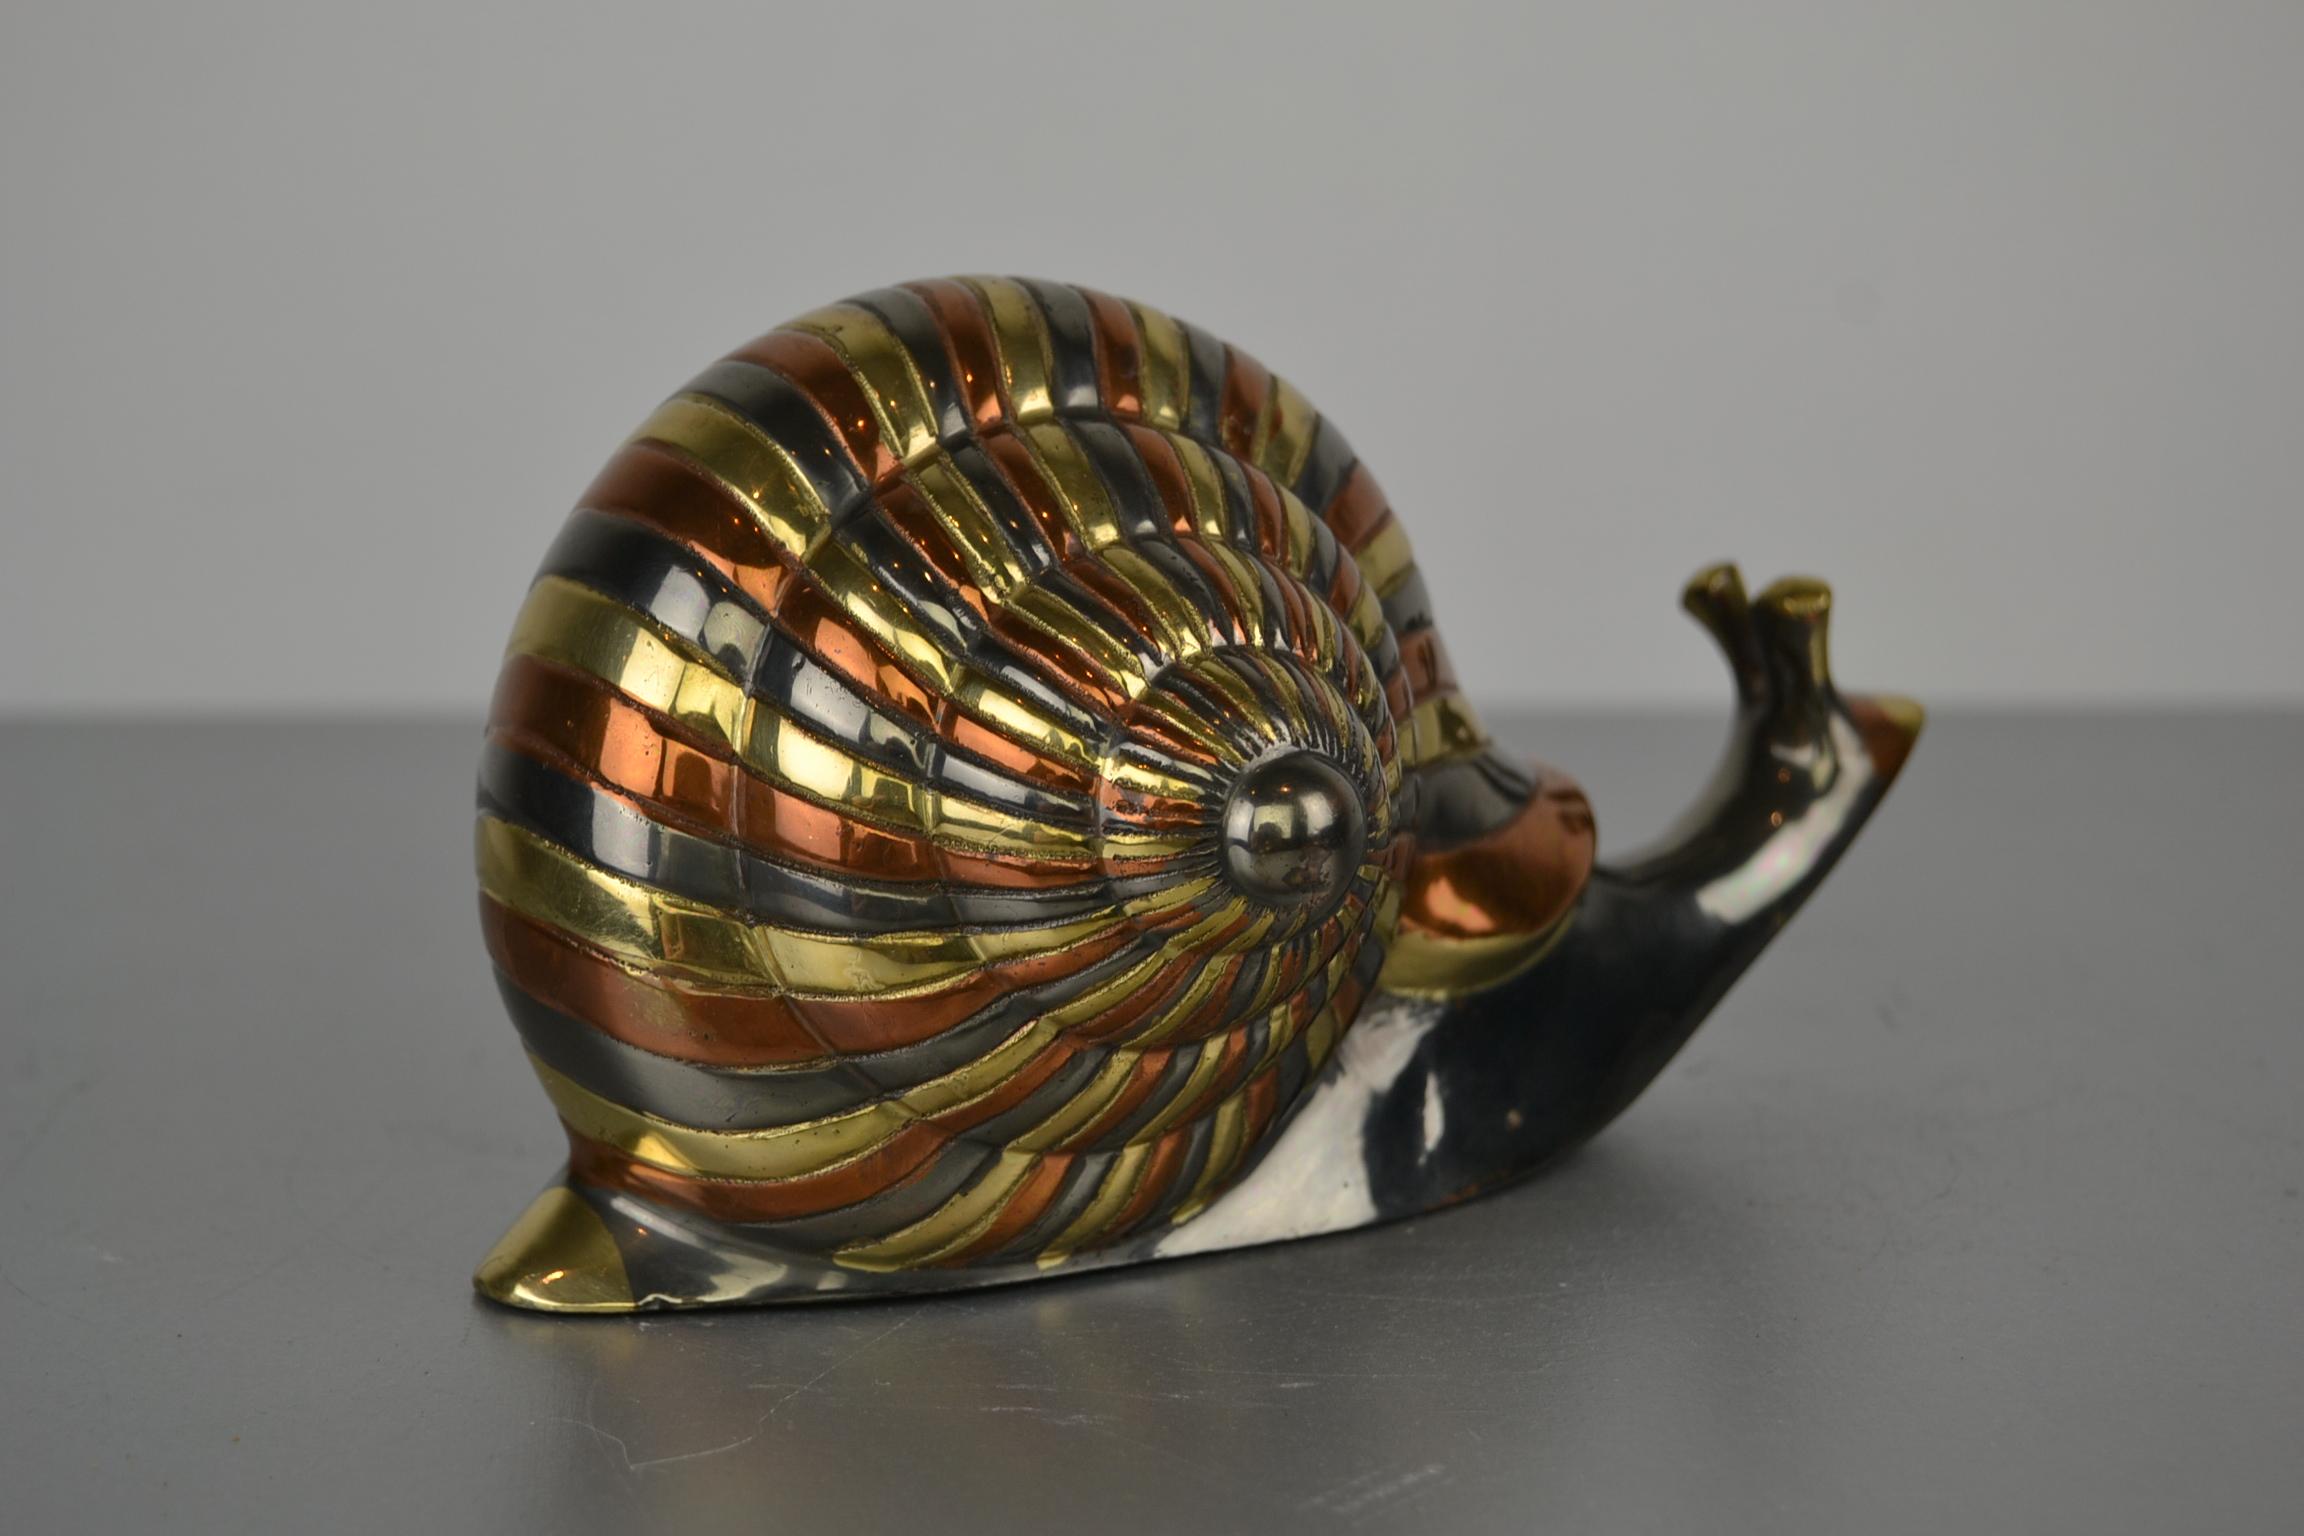 Stylish Hollywood Regency decoration object in the shape of a snail.
Three colored: yellow, red and silver metal and brass.
This Mid-Century Modern animal figurine dates from the 1960s and can also be used as a paperweight or desk accessory.